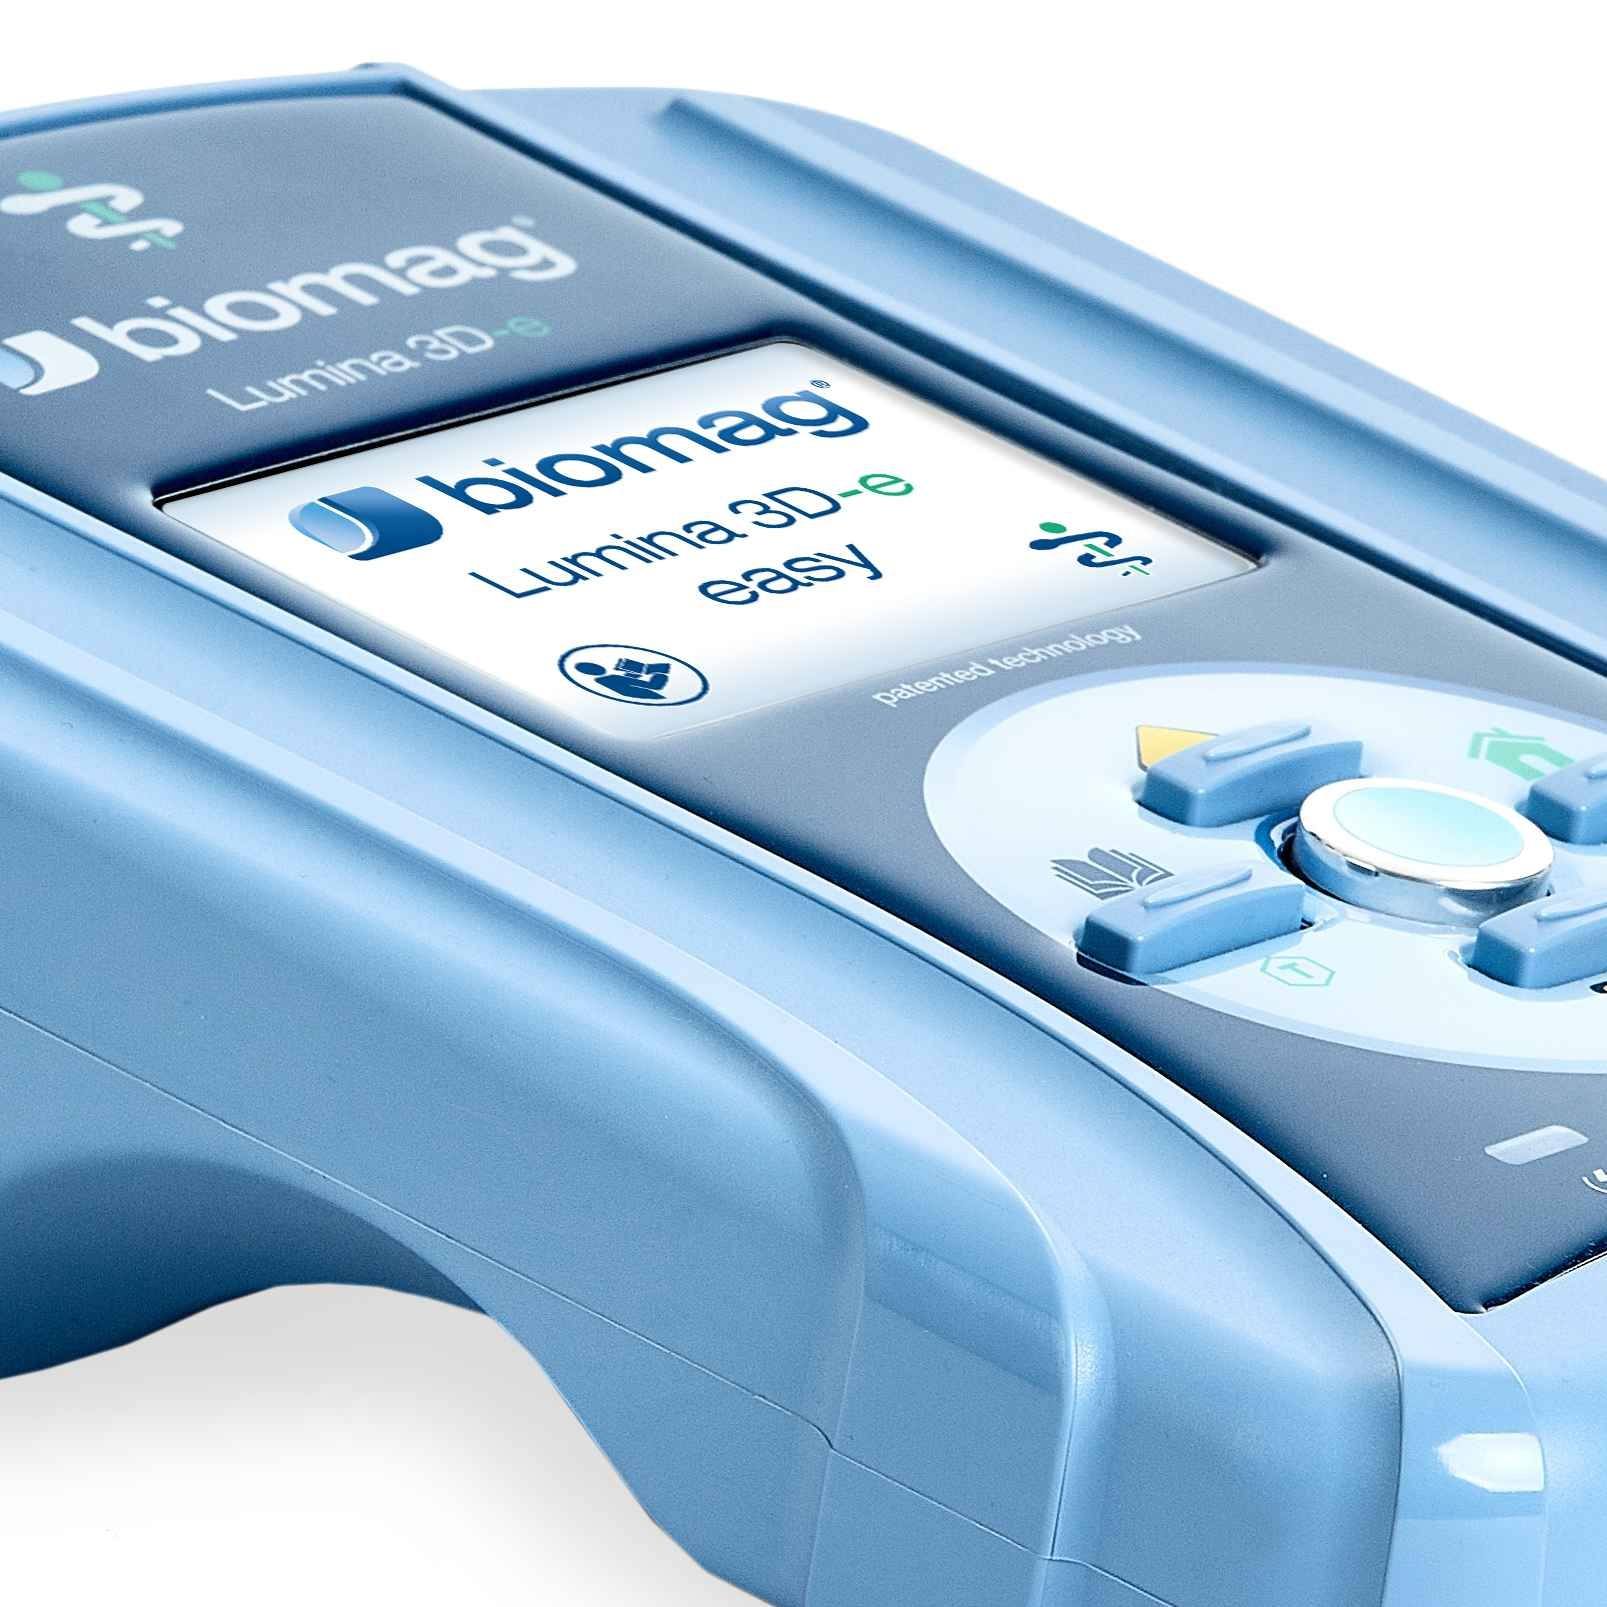 New Devices of Biomag e-series